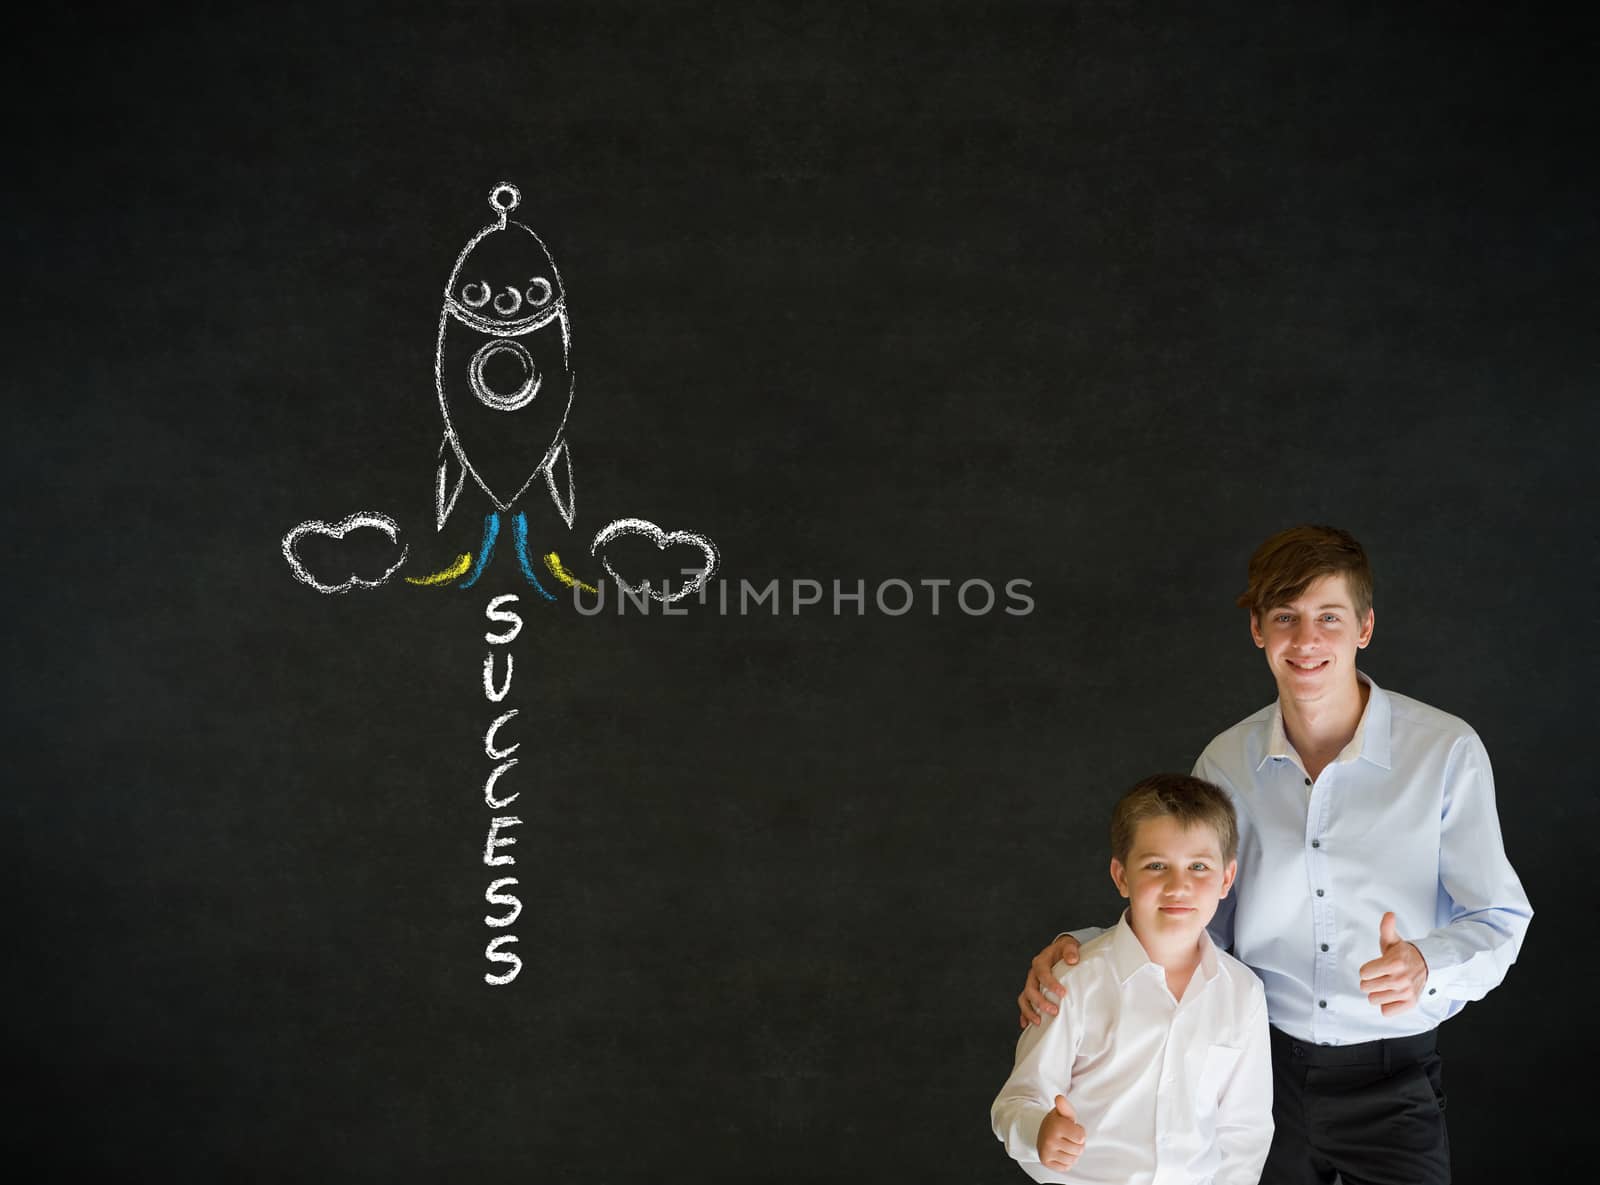 Thumbs up boy dressed up as business man with teacher man and chalk success rocket on blackboard background